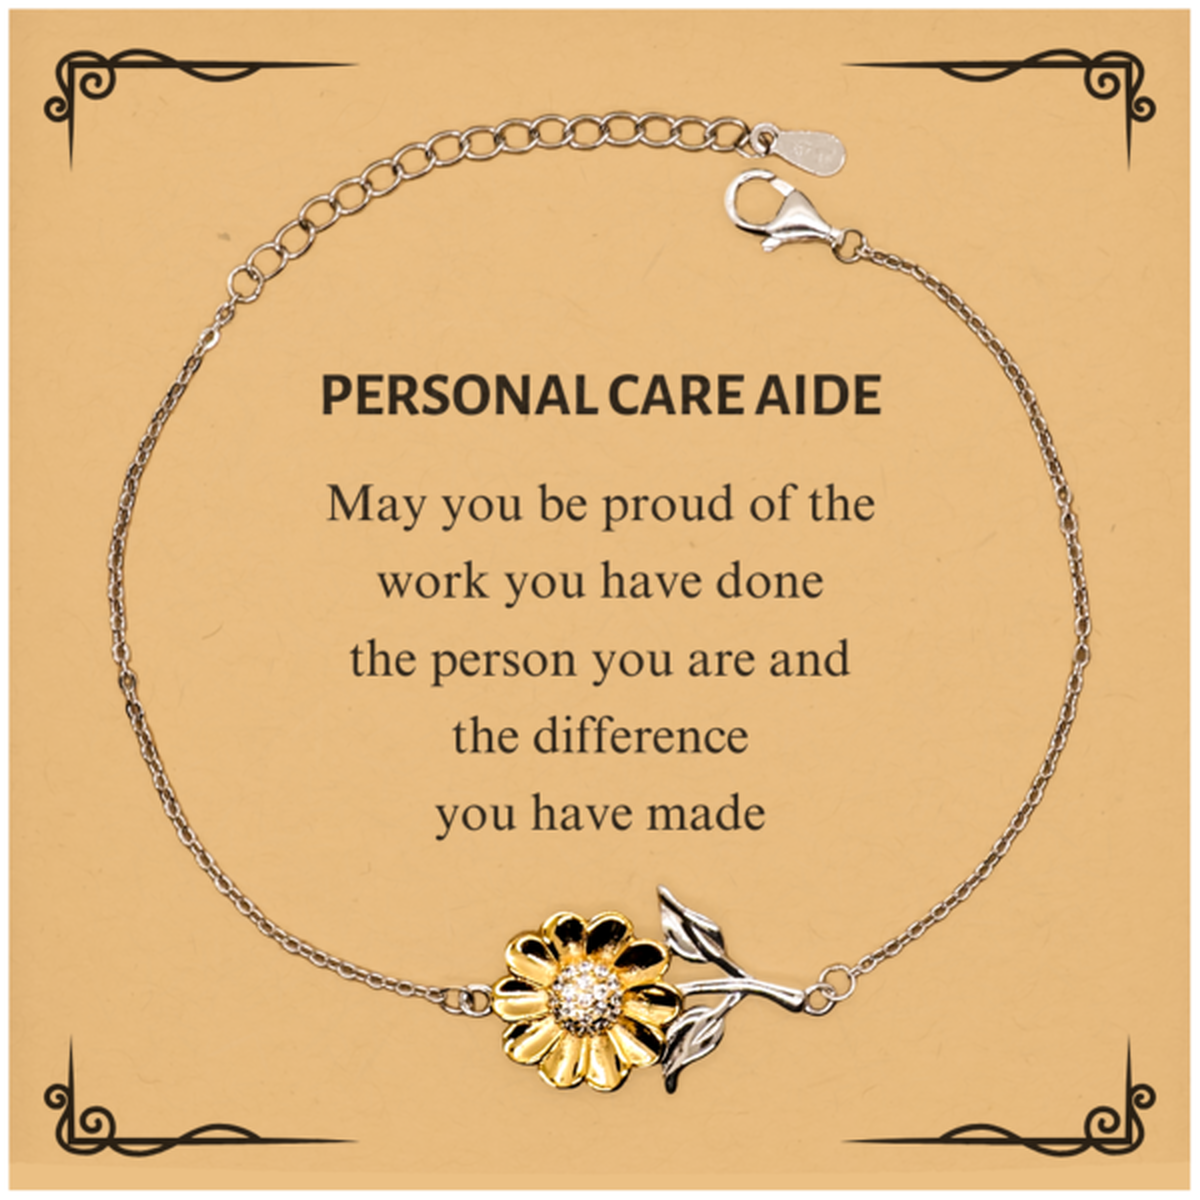 Personal Care Aide May you be proud of the work you have done, Retirement Personal Care Aide Sunflower Bracelet for Colleague Appreciation Gifts Amazing for Personal Care Aide